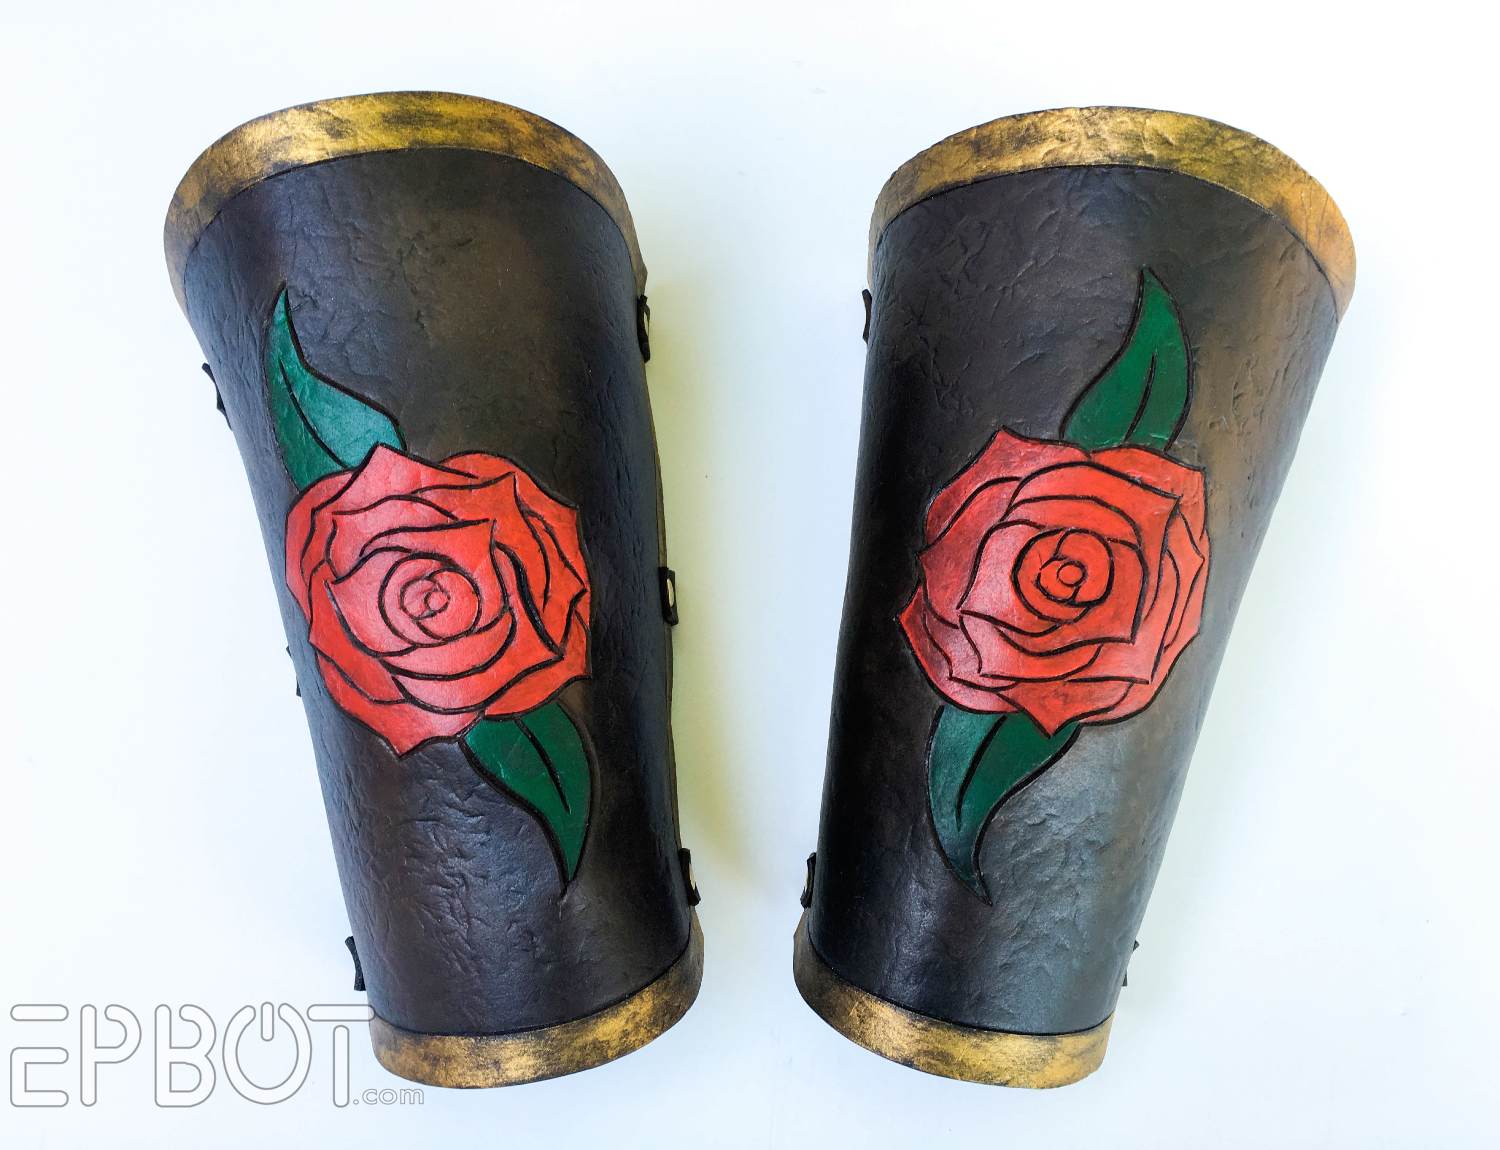 EPBOT: Make These Warrior Belle Leather Bracers From Fun Foam!